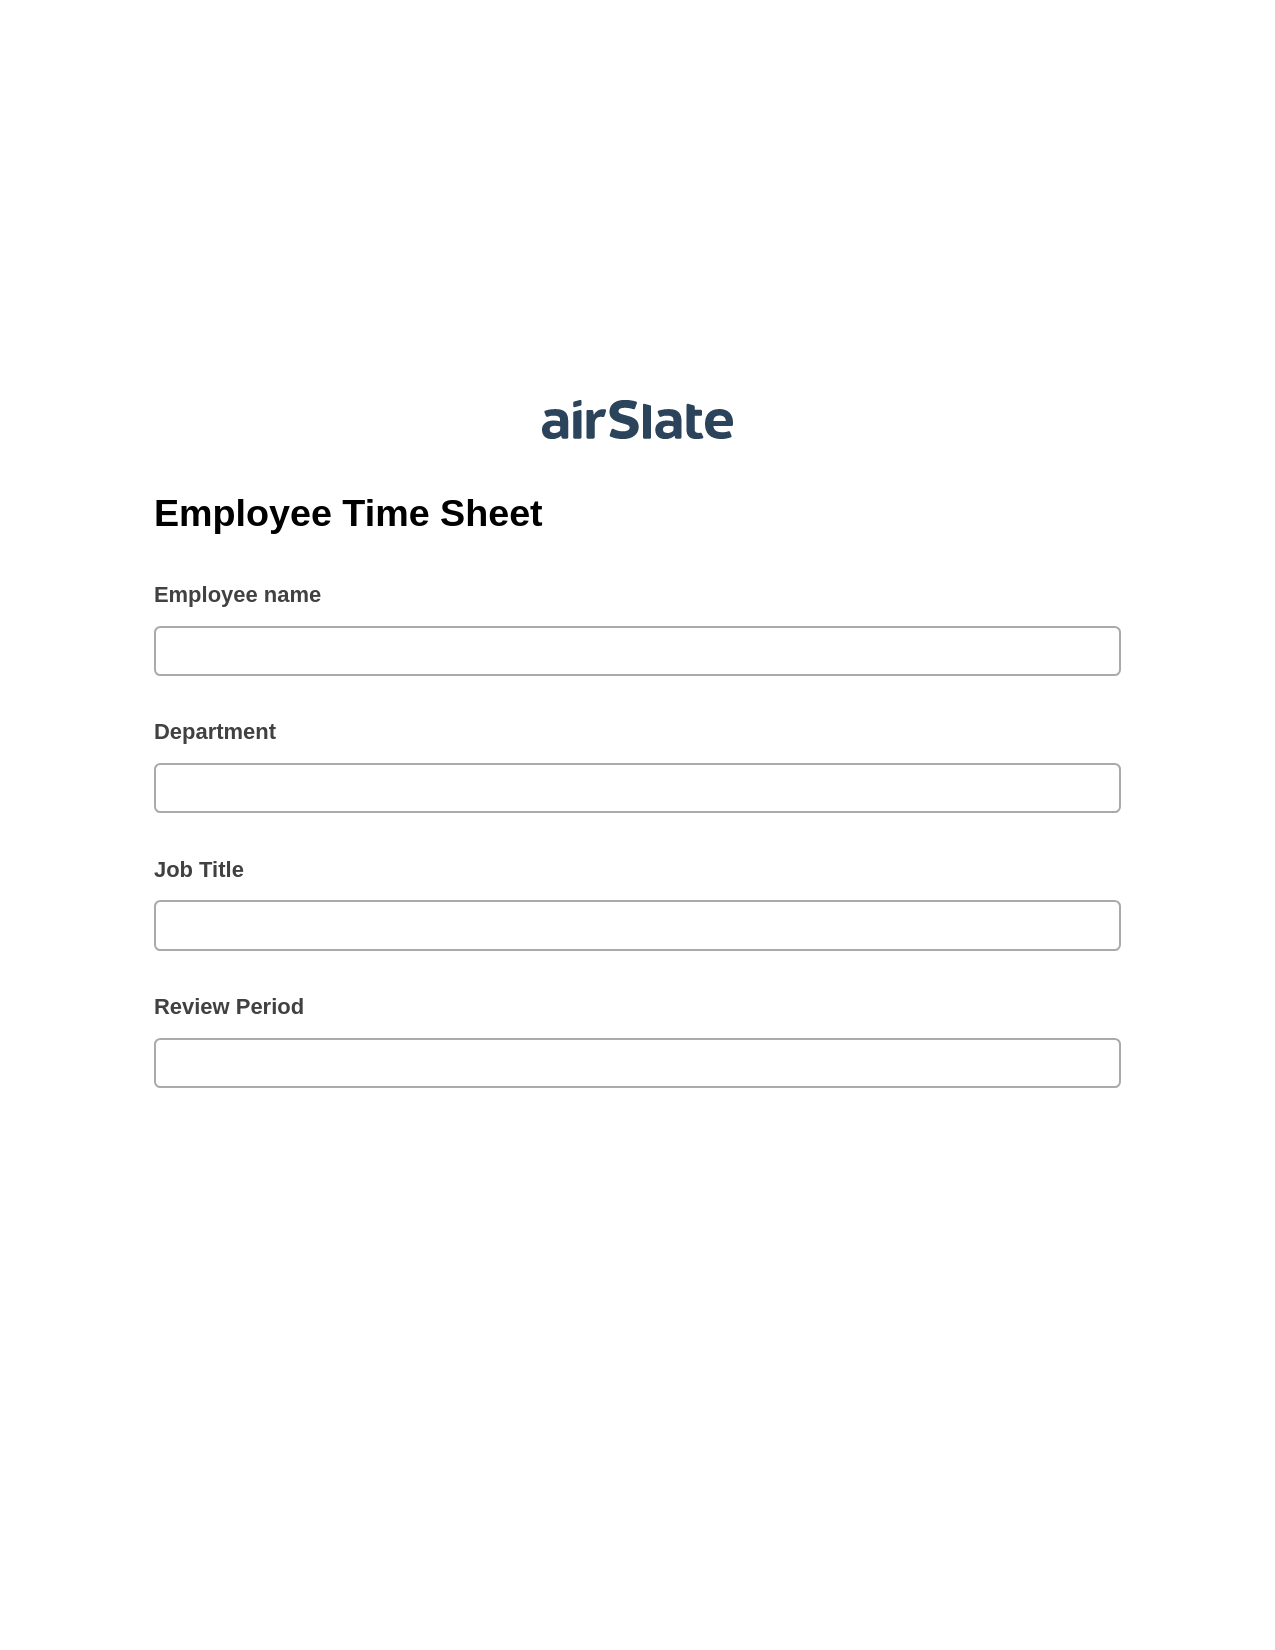 Employee Time Sheet Pre-fill from Excel Spreadsheet Bot, Create Slate every Google Sheet Update Bot, Post-finish Document Bot